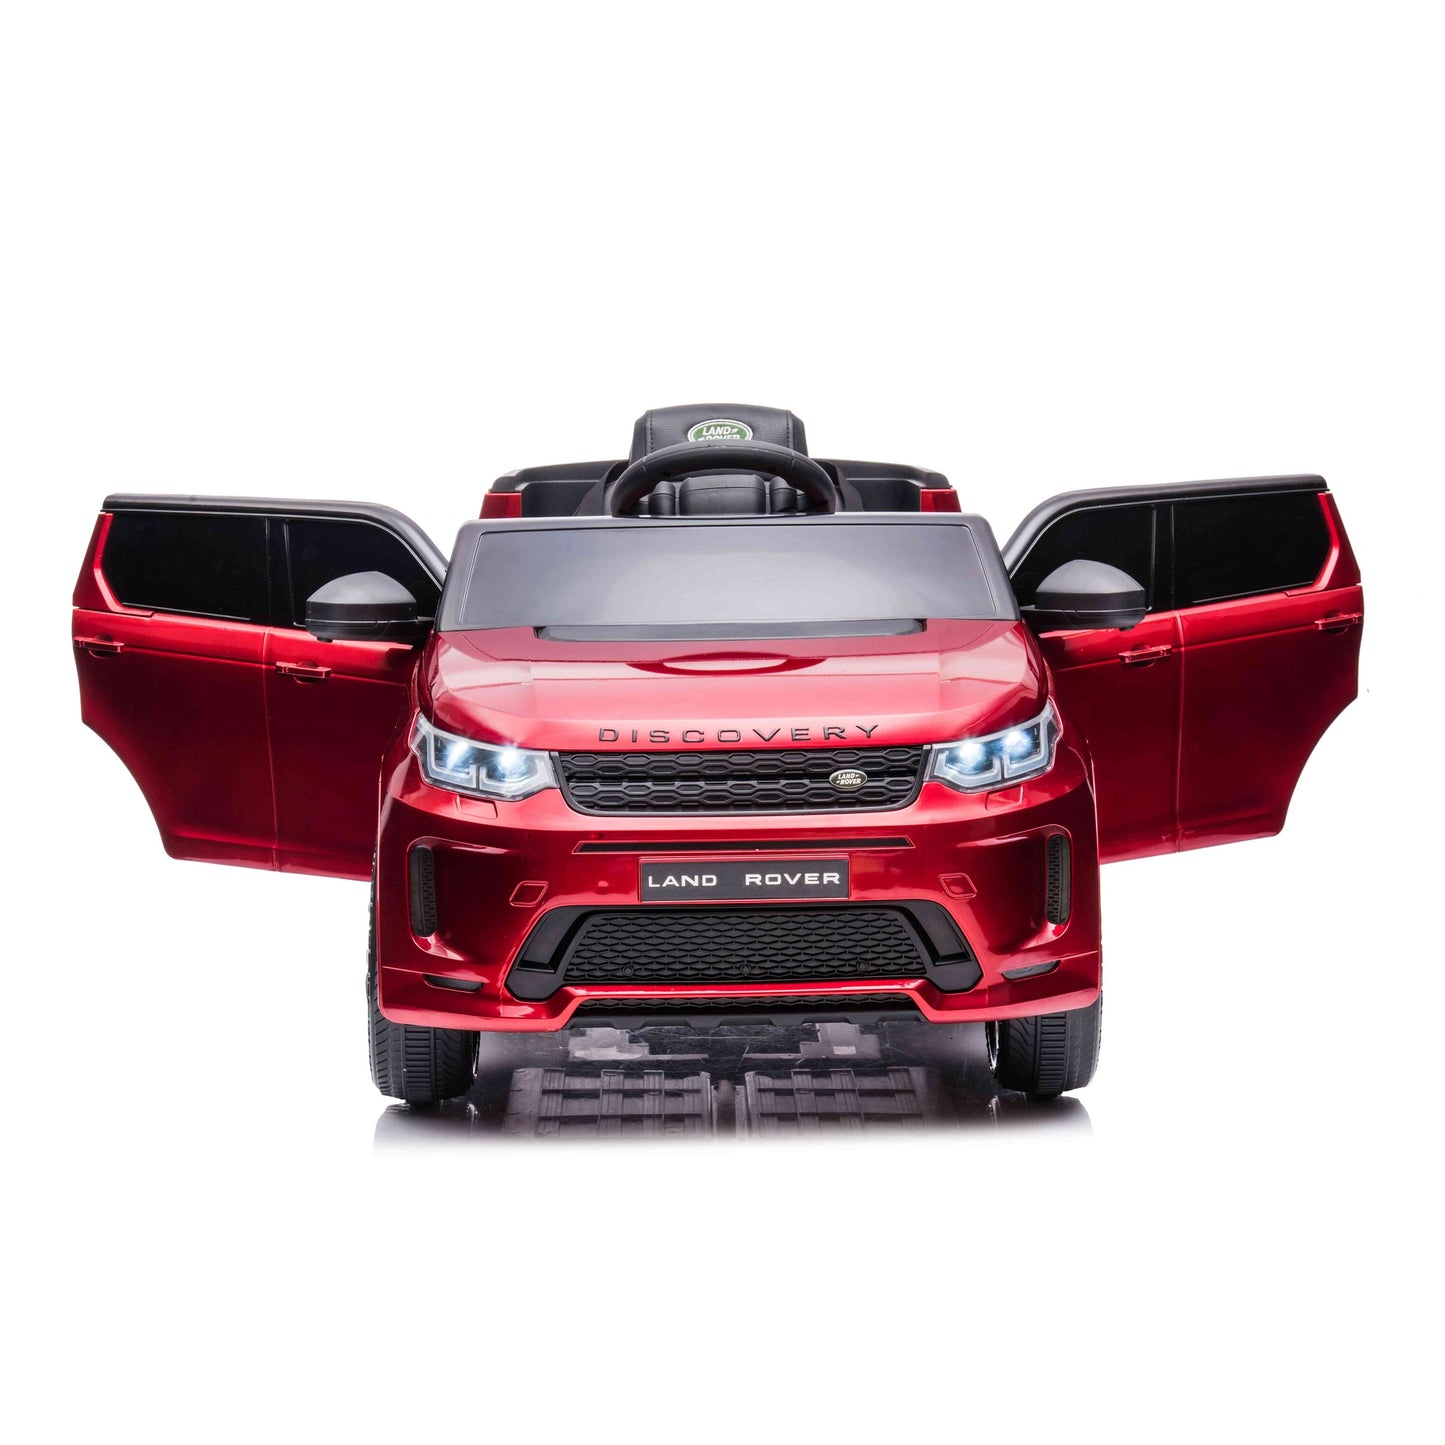 Licensed Range Discovery Sport 12v Kids Ride on Car with Remote -Metallic Red